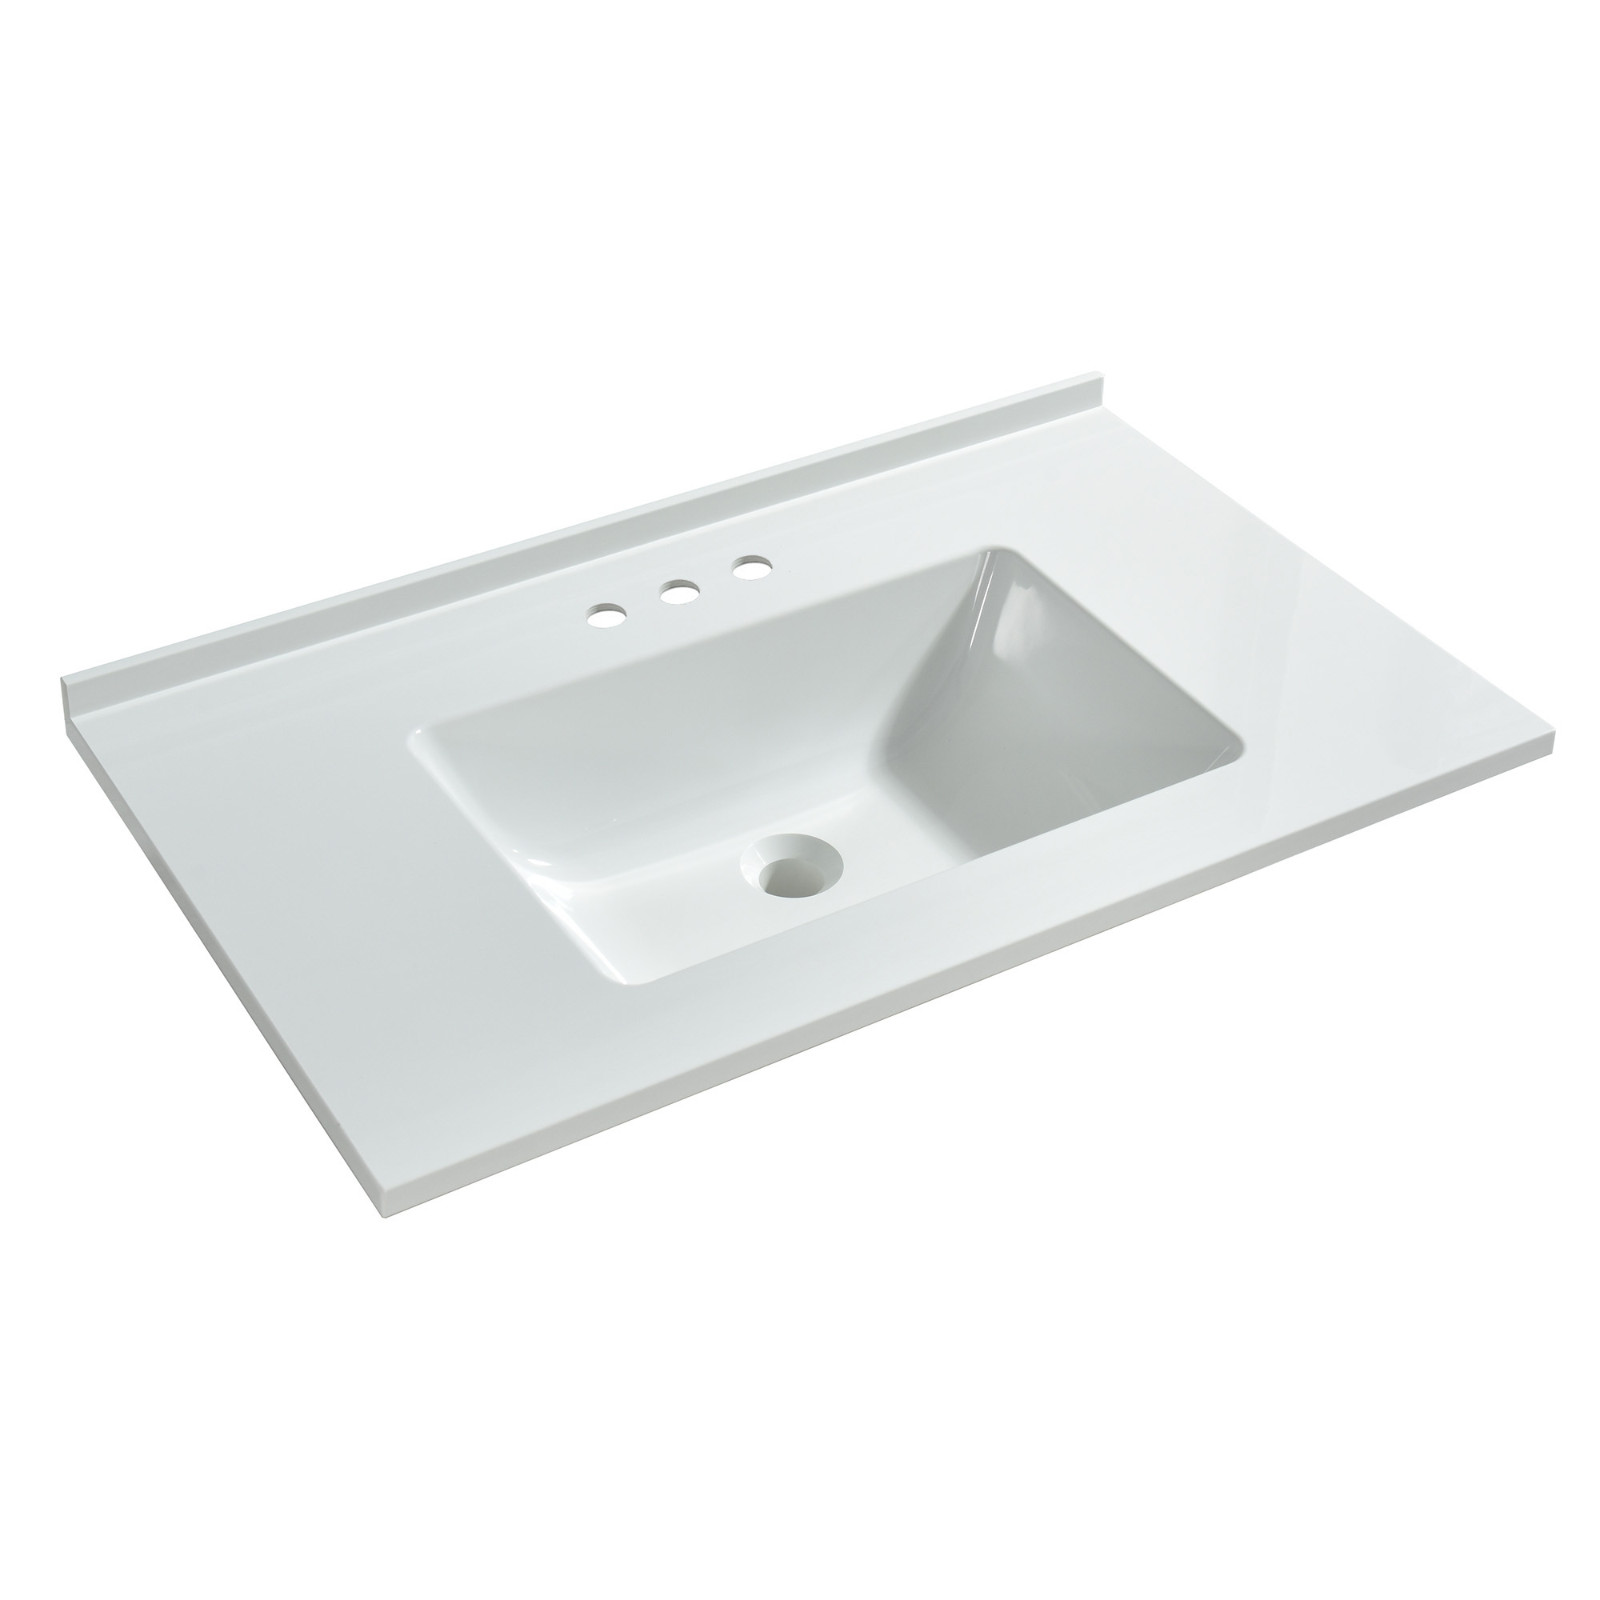  WOODBRIDGE VT3119-1000 Solid Surface Vanity Top with with Intergrated Sink and 3 Faucet Holes for 4-Inch Centerset Faucet, 31